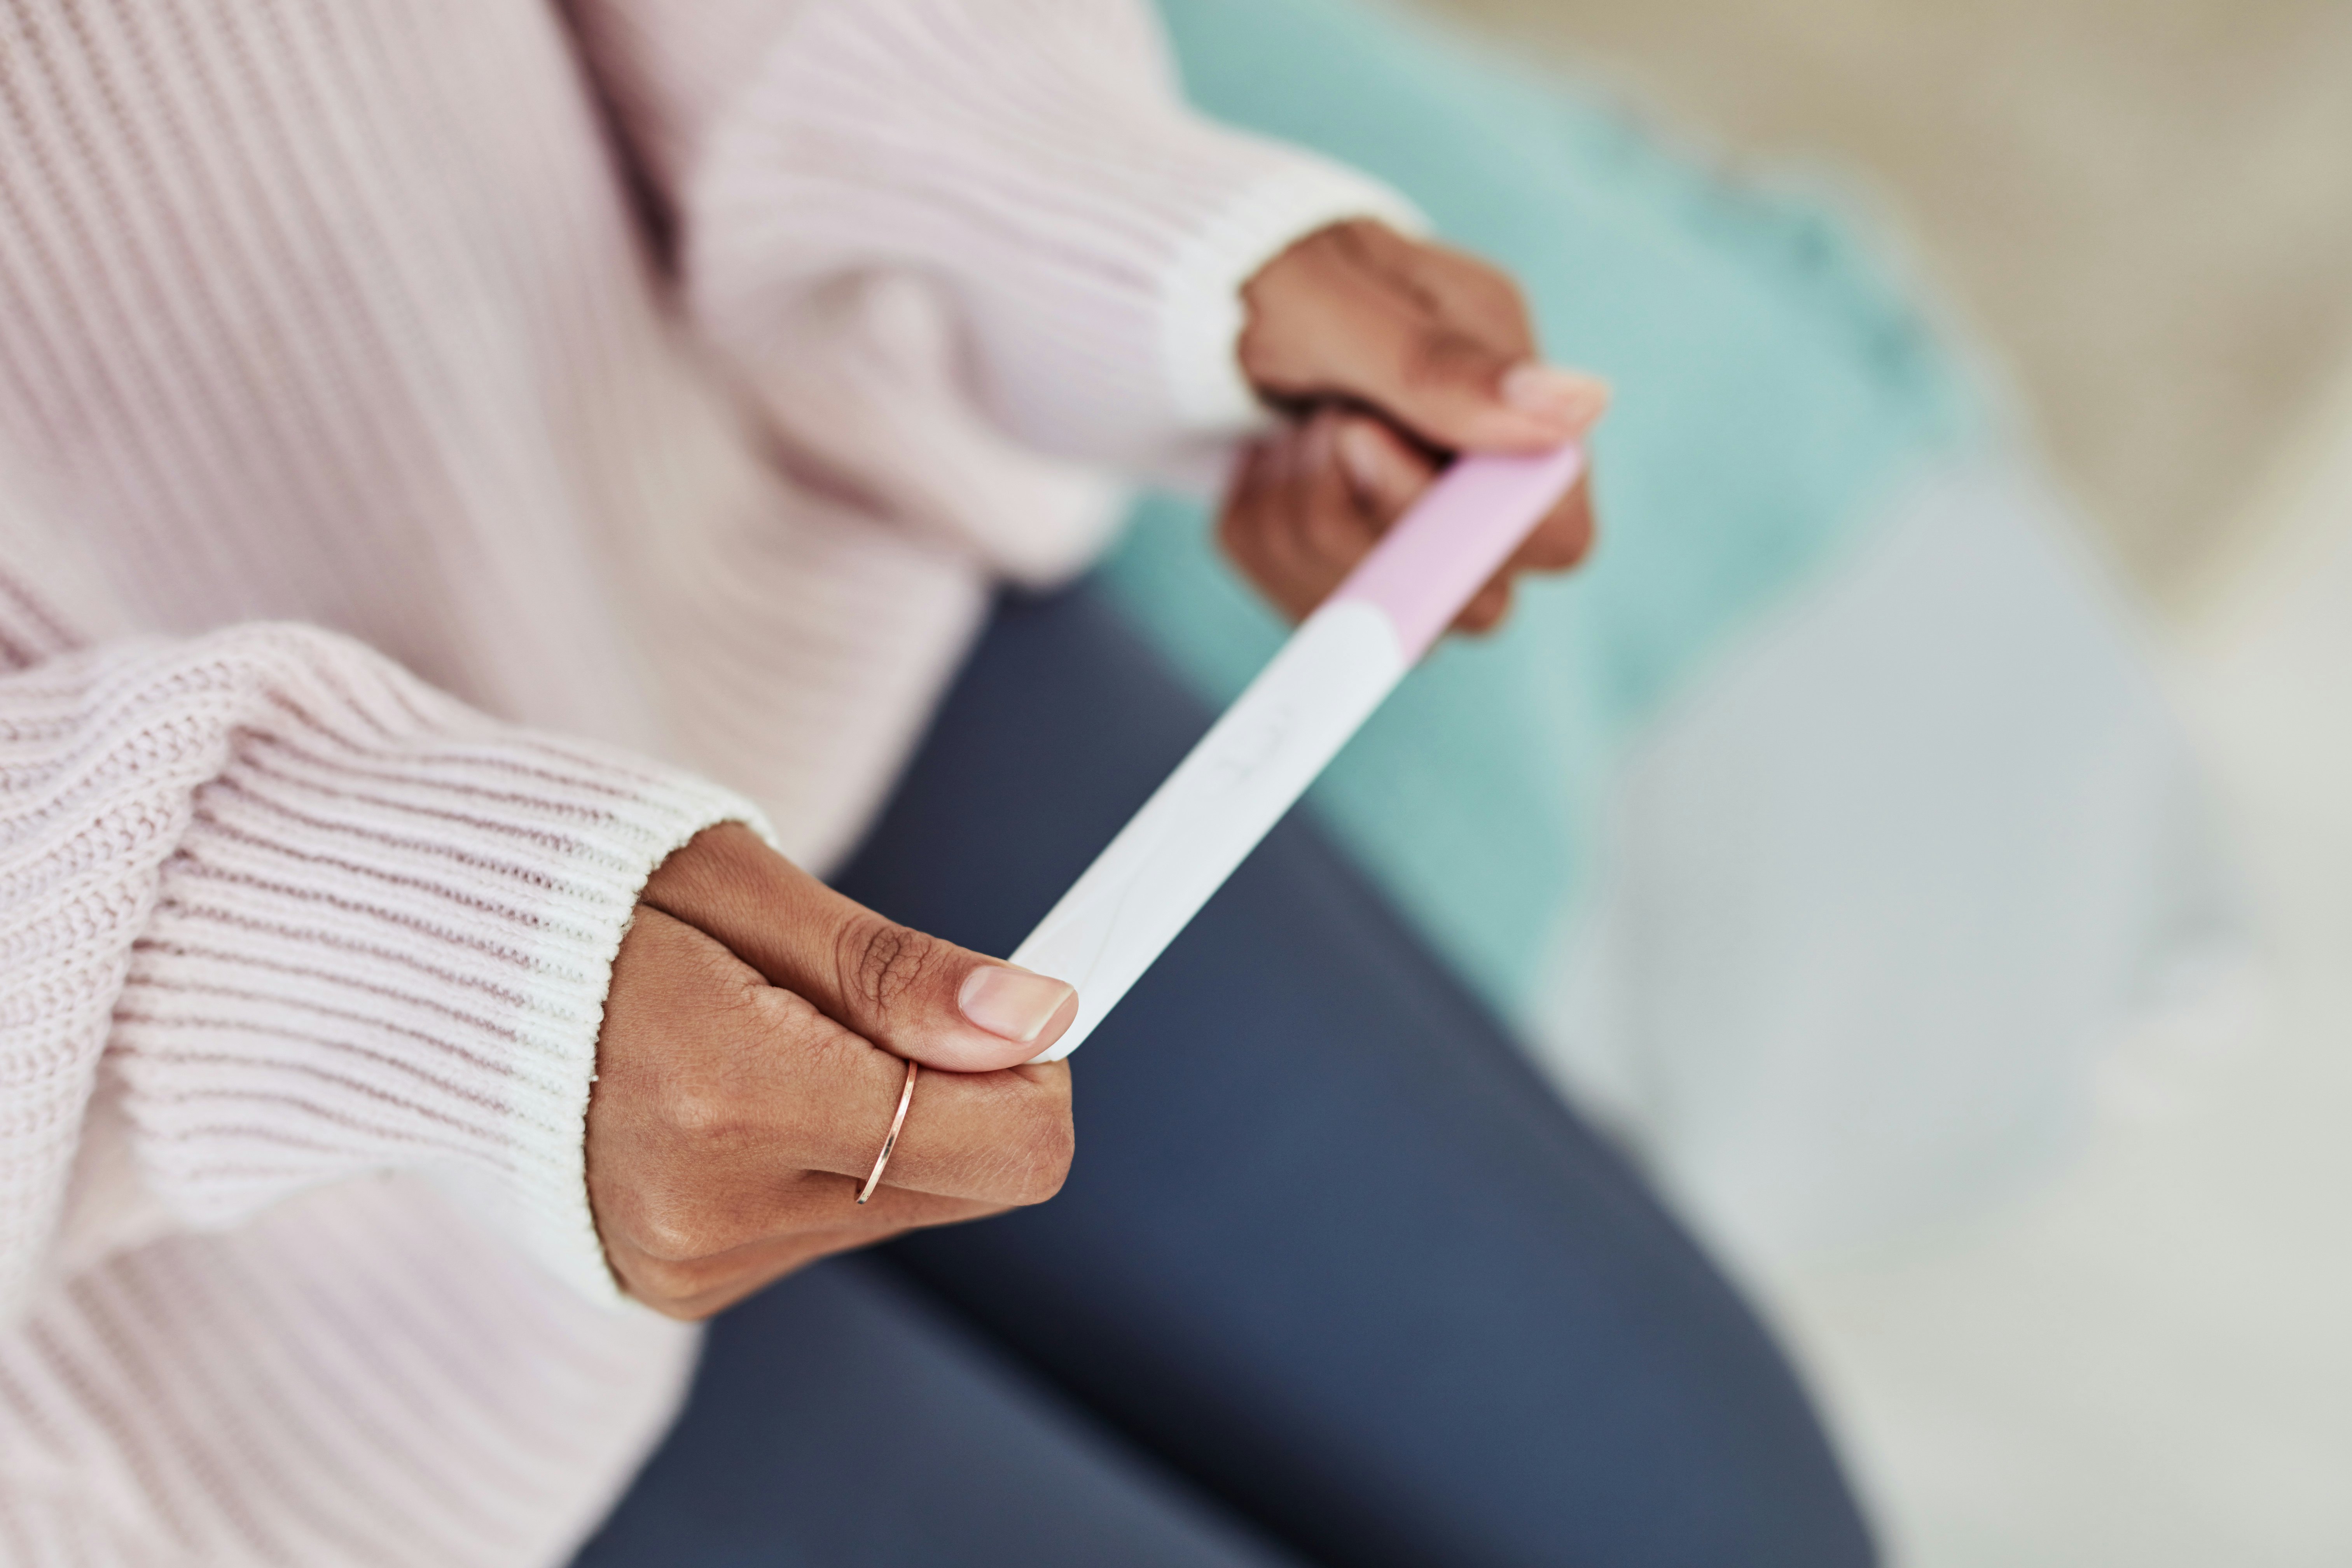 What does a faint line on an ovulation test mean? - Inito